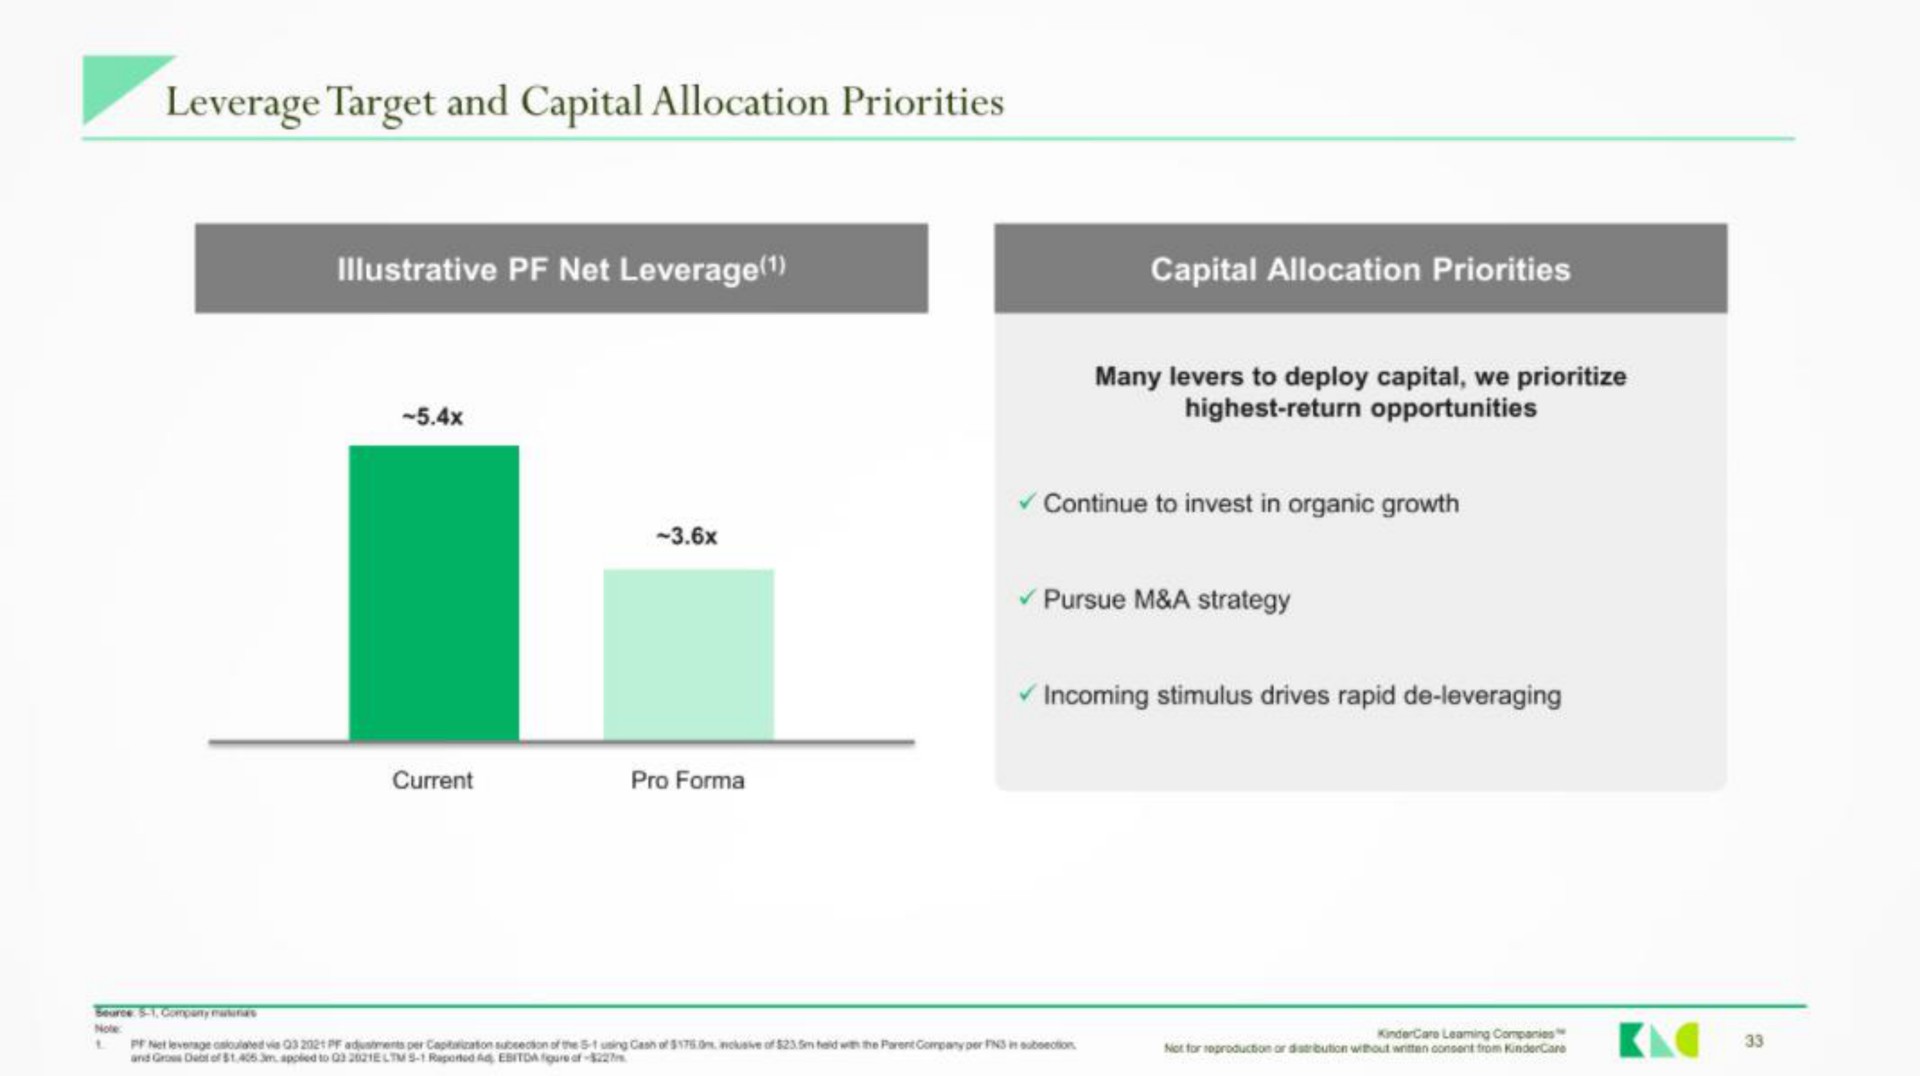 a leverage target and capital allocation priorities | KinderCare